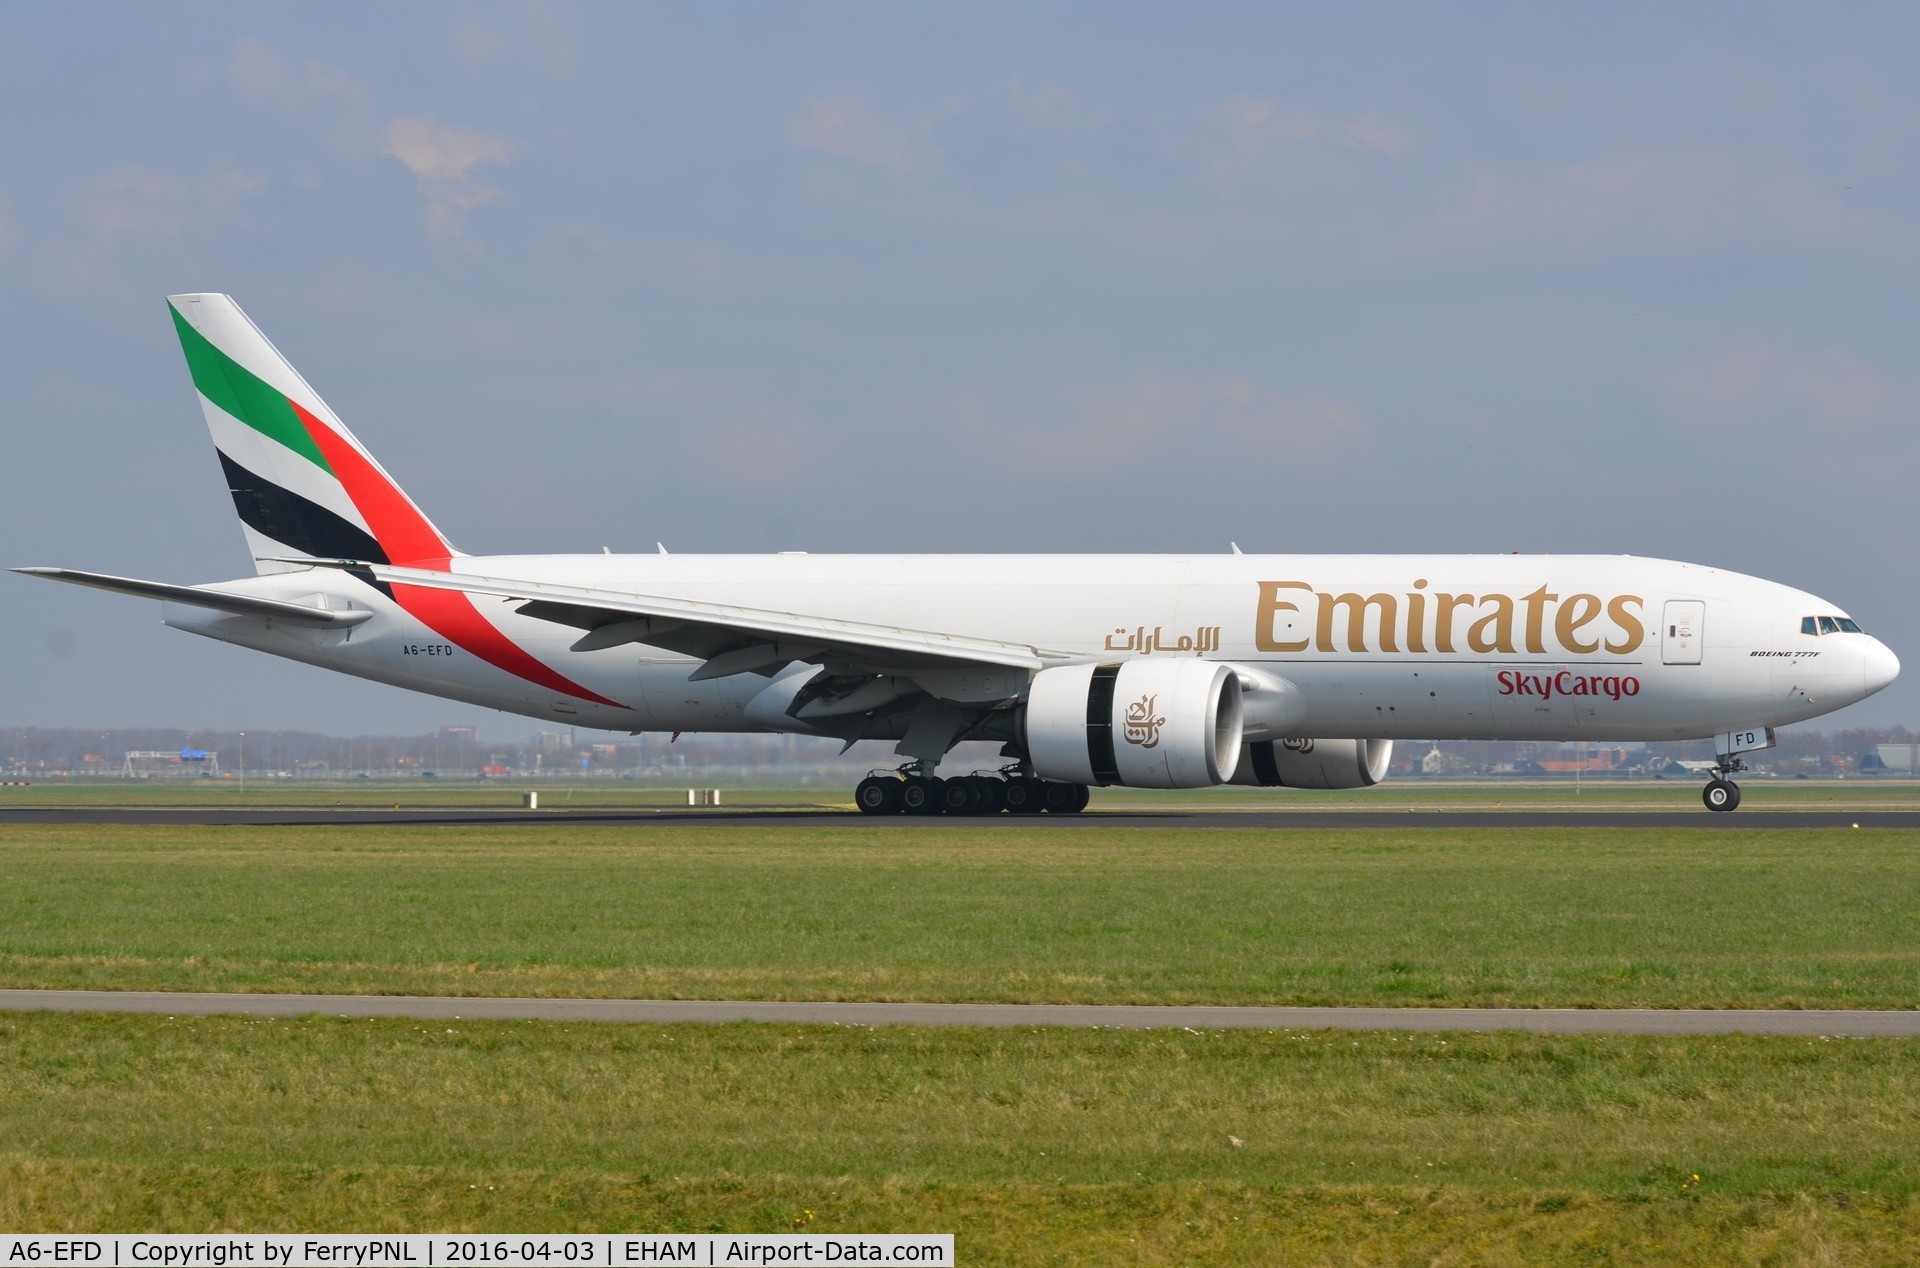 A6-EFD, 2009 Boeing 777-F1H C/N 35606, Emirates B772 Freighter arriving in AMS